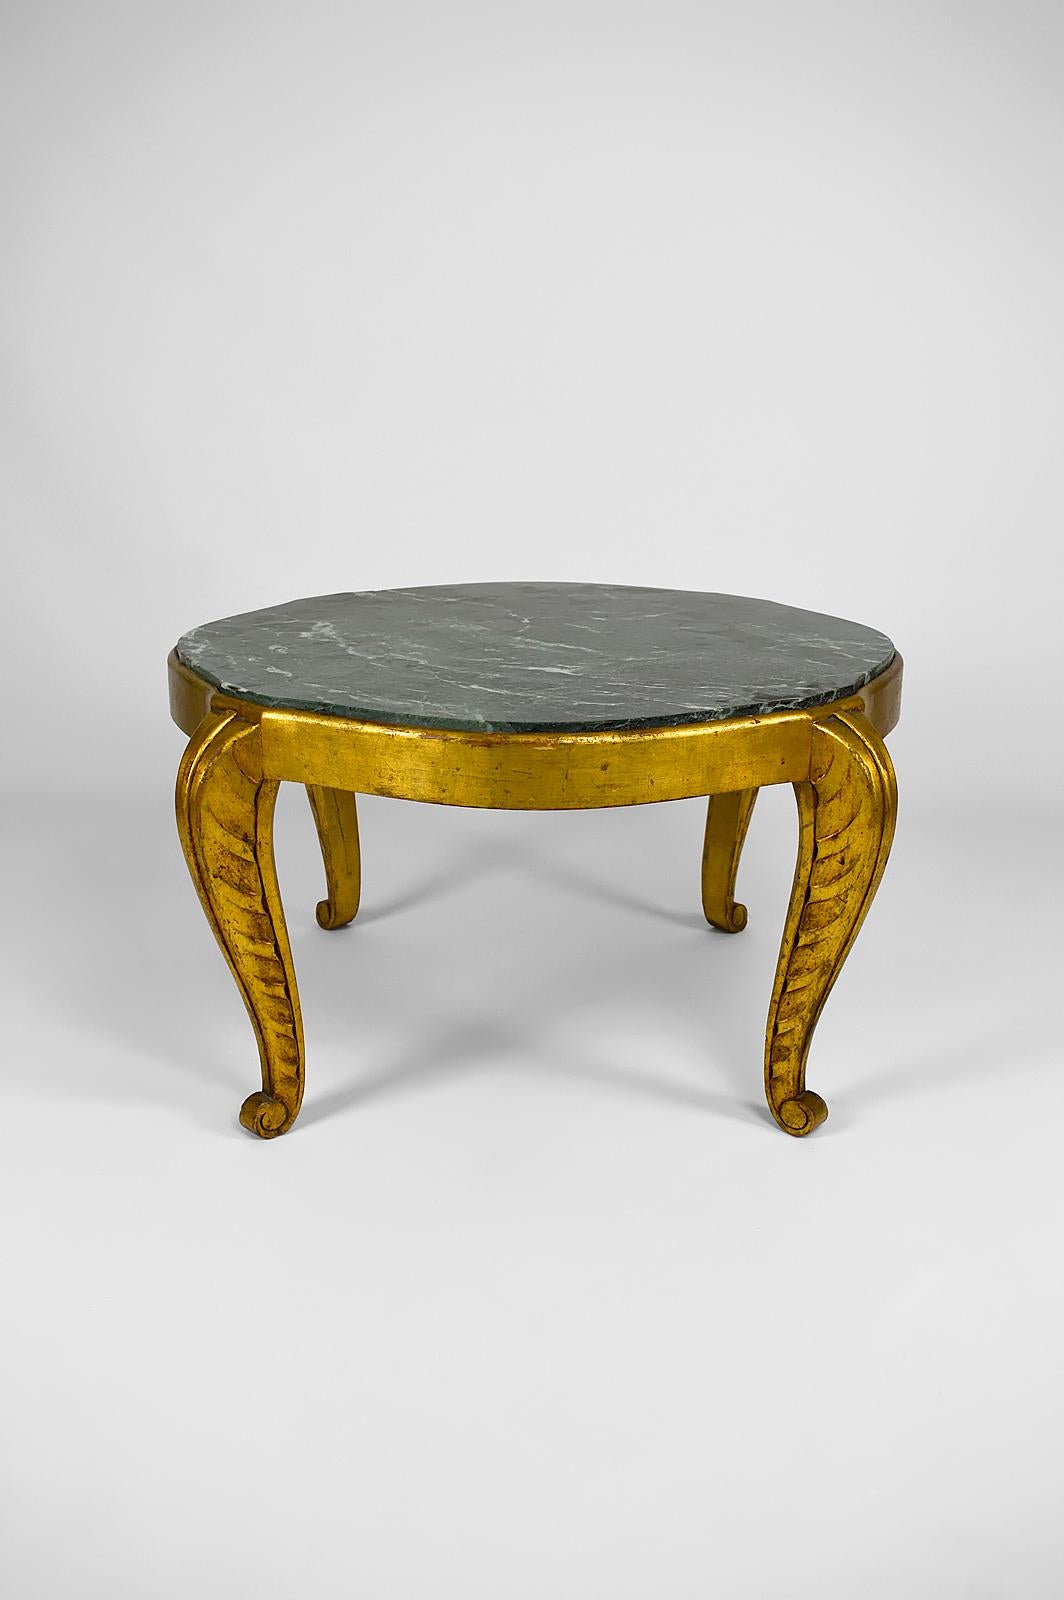 French Gilded Side Table with Marble Top by Maison Jansen, Neoclassical Art Deco, 1940s For Sale